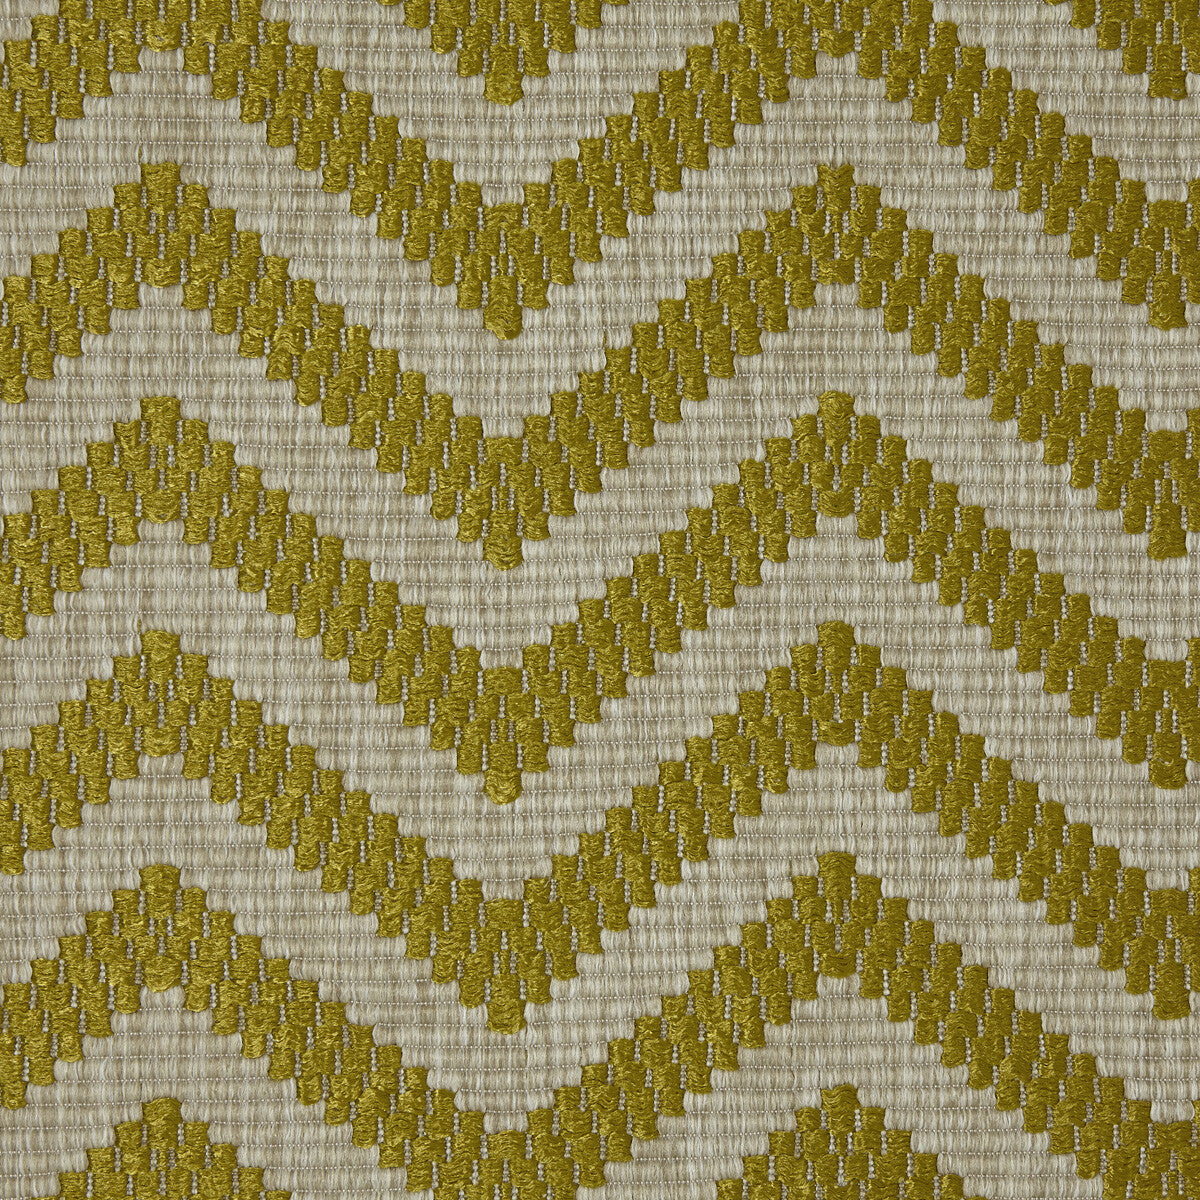 Marelle fabric in 5 color - pattern LZ-30347.05.0 - by Kravet Design in the Lizzo Indoor/Outdoor collection